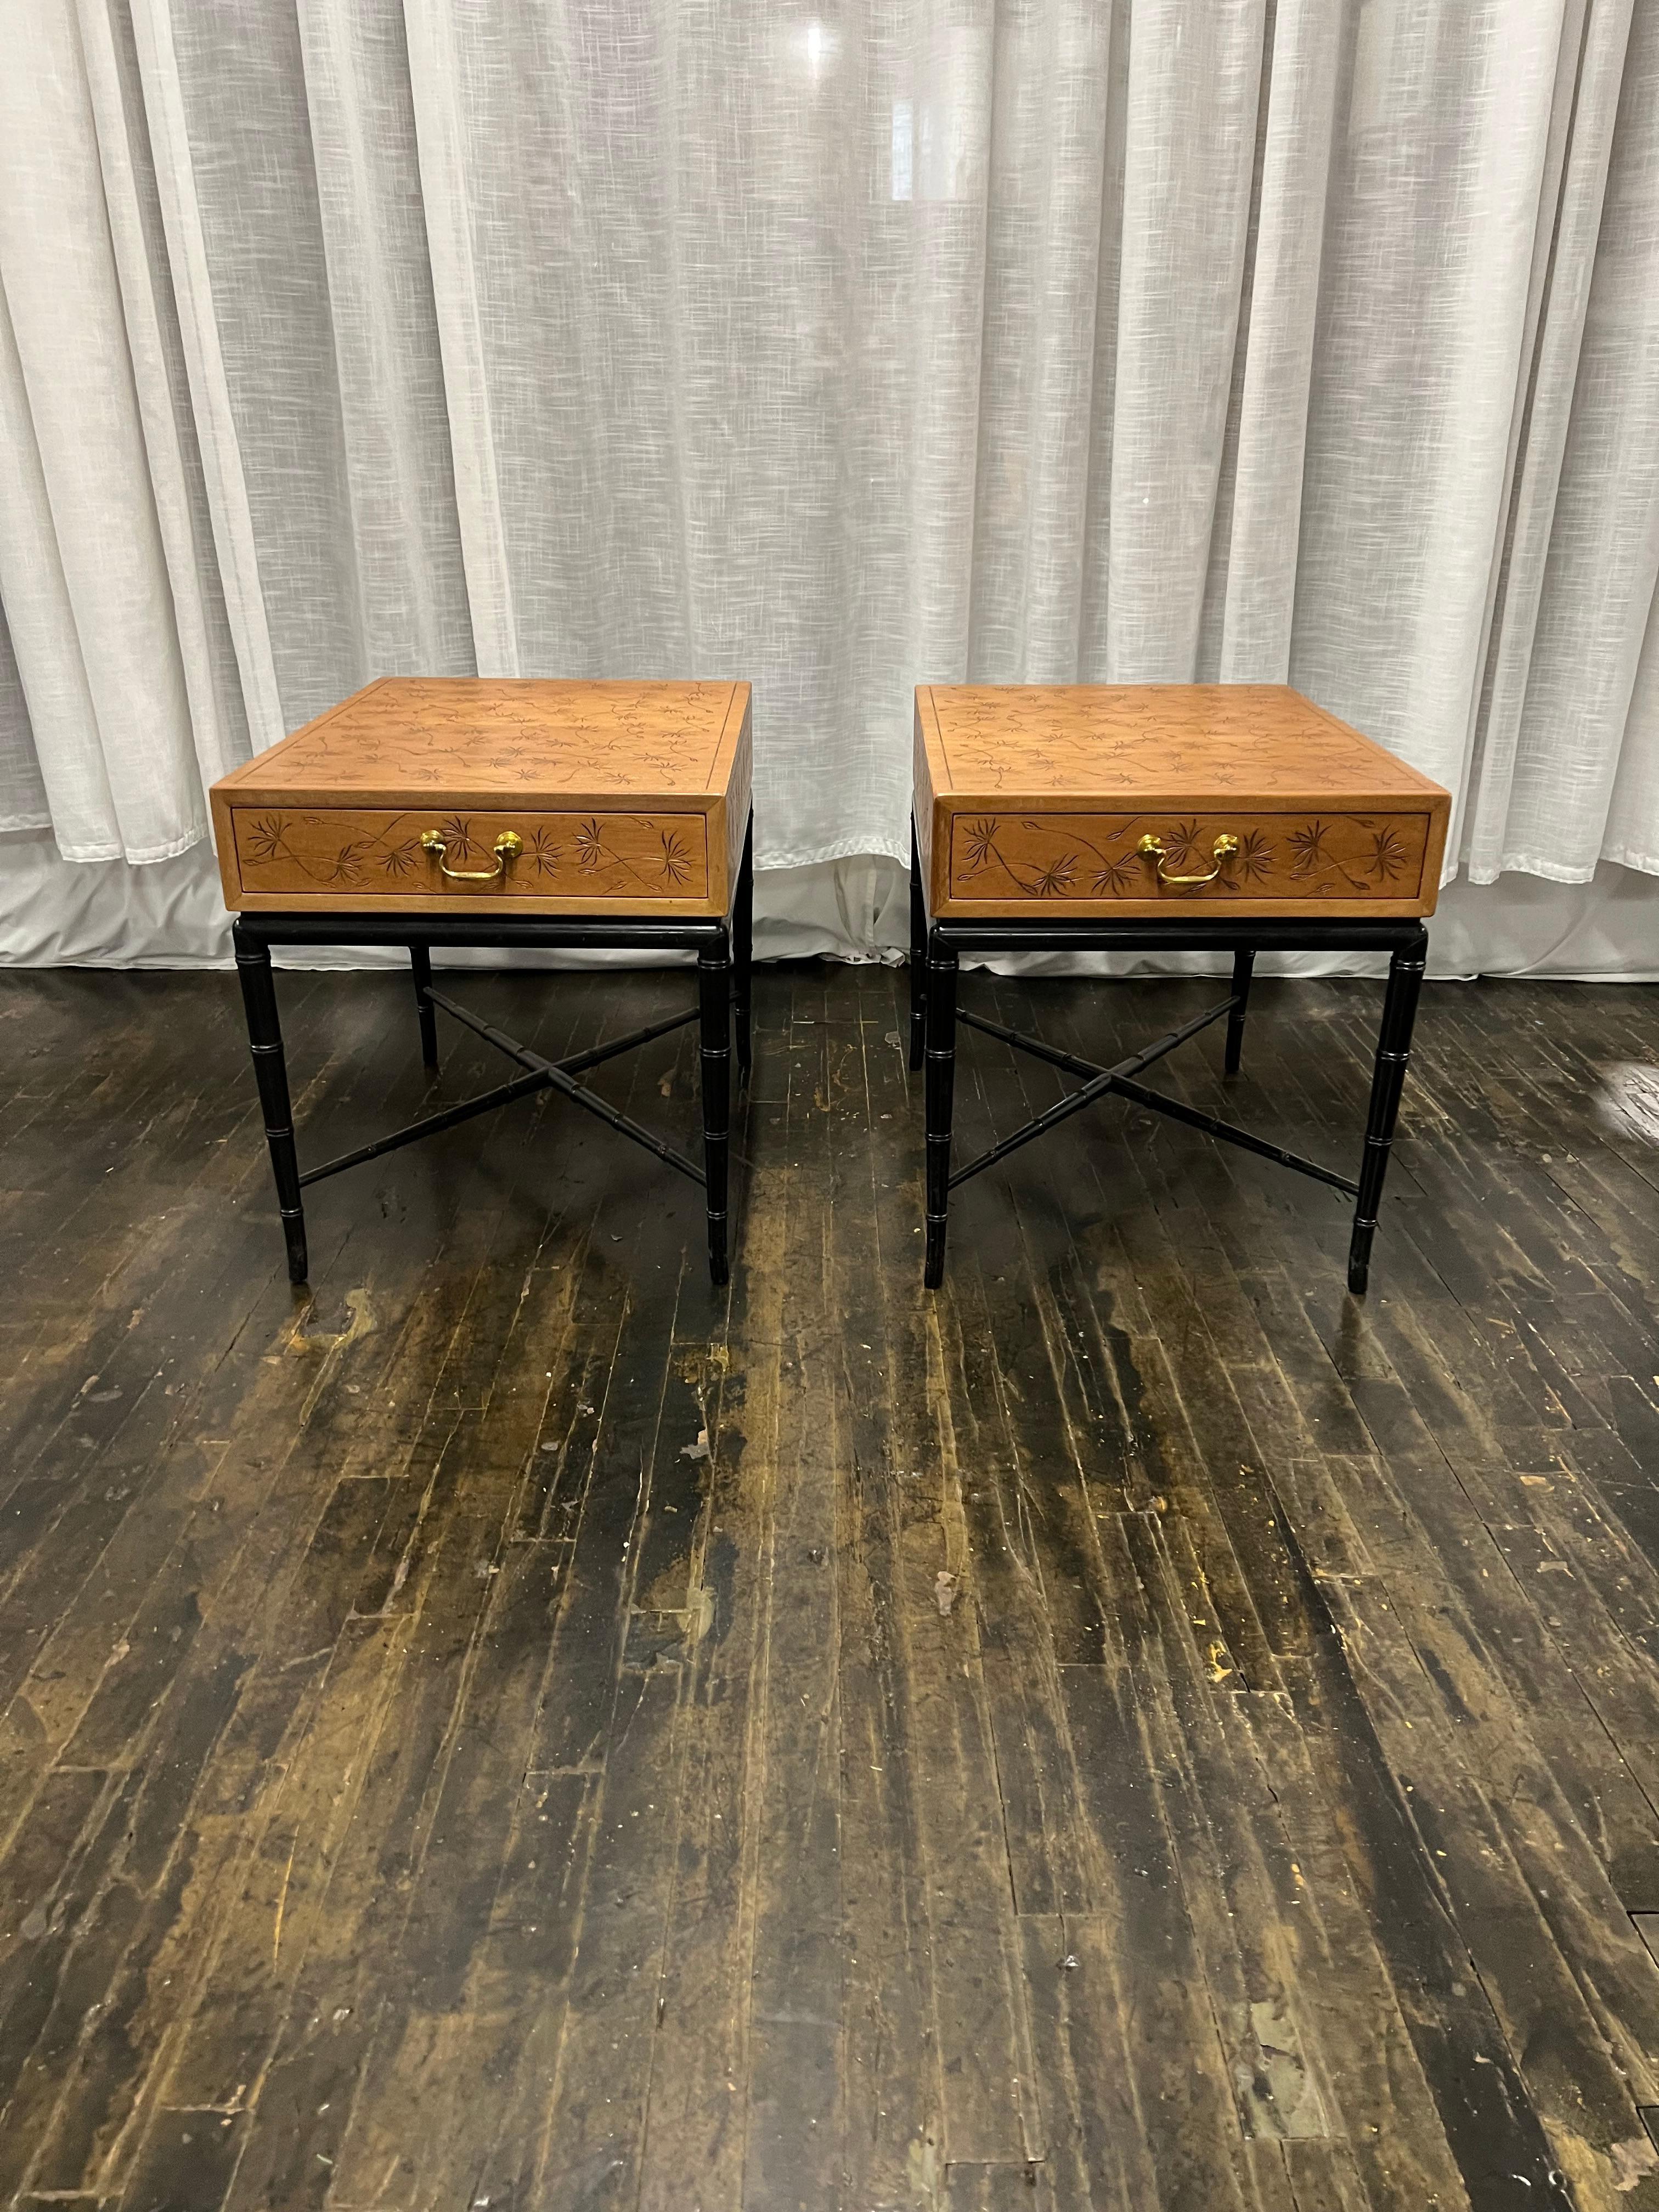 Pair of Midcentury Kittinger Side Tables with Drawers on Faux Bamboo Base For Sale 3